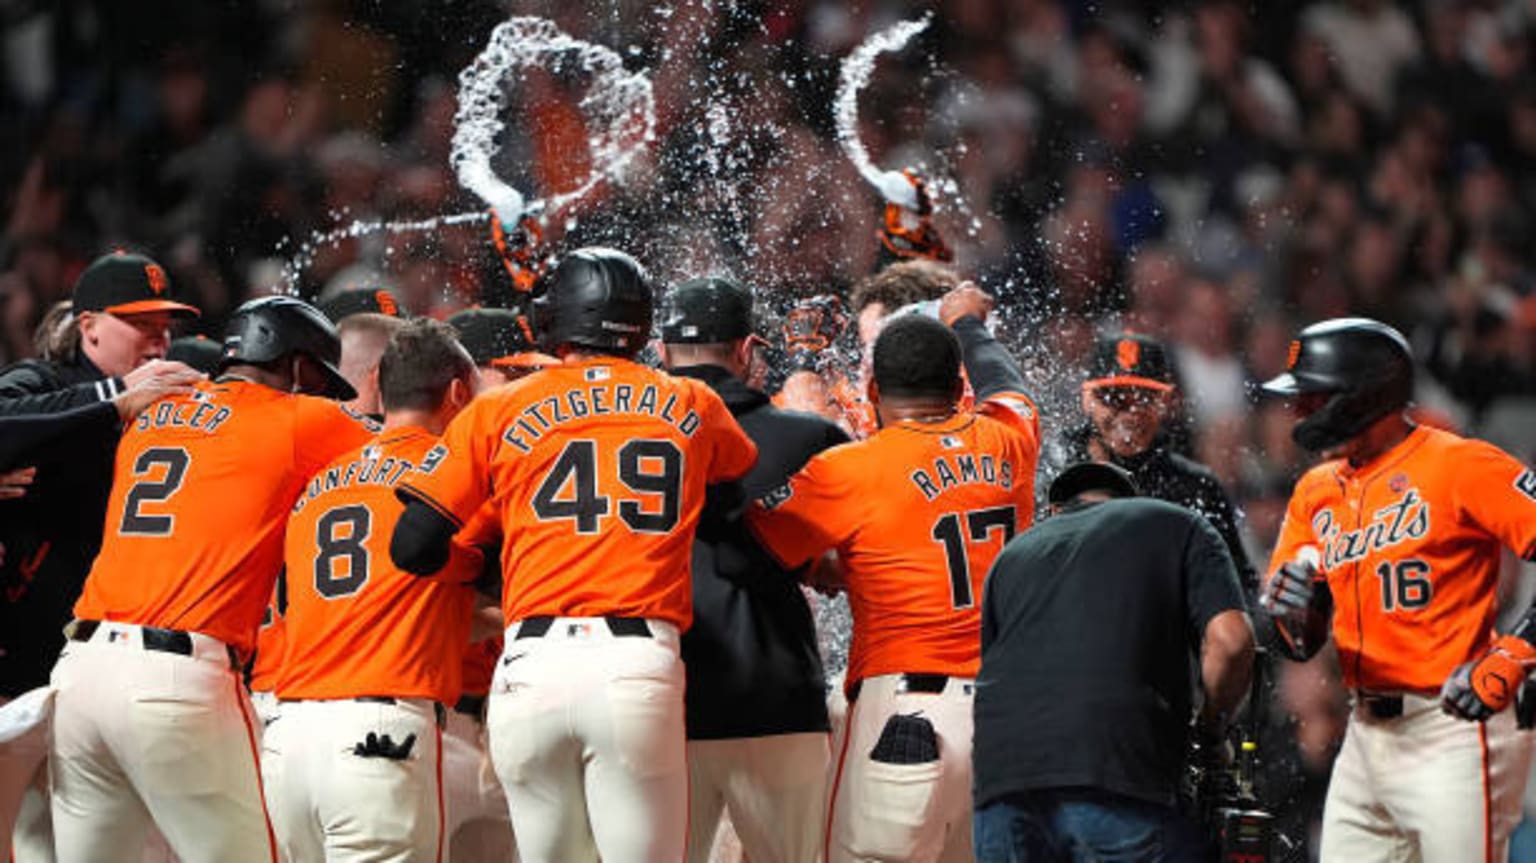 The Giants celebrate after a walk-off victory